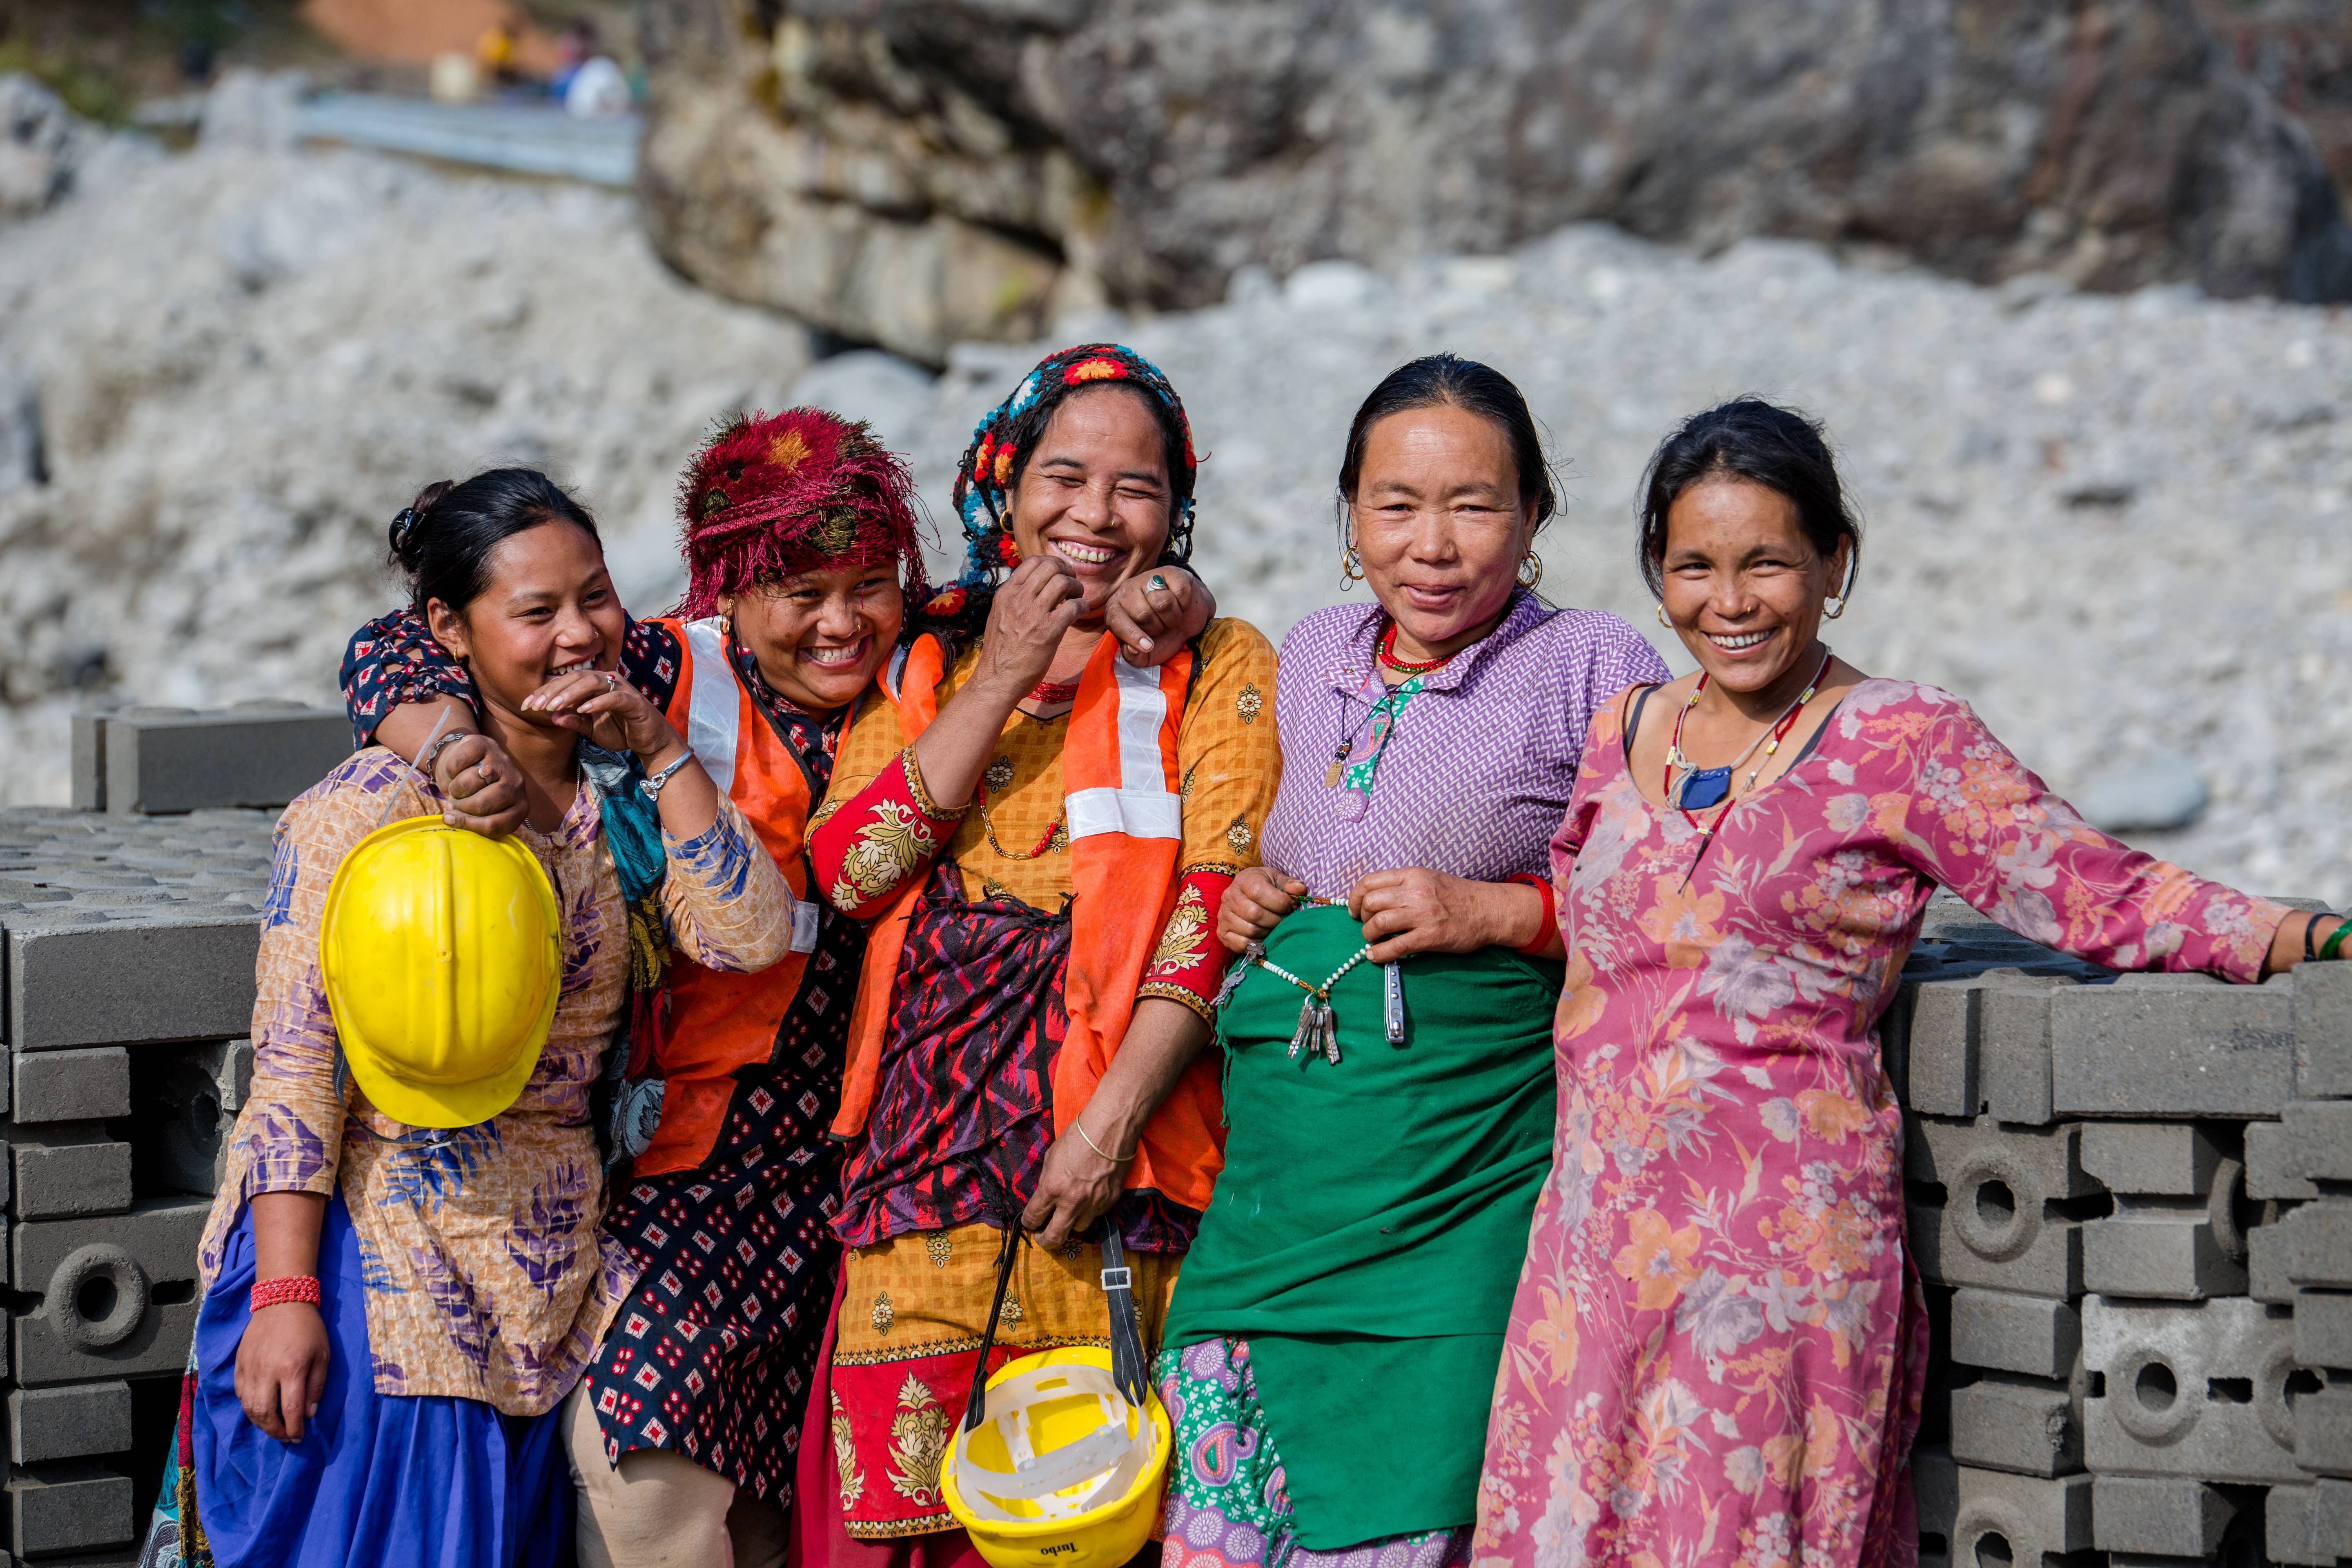 Build up Nepal: Promoting inclusive jobs and safe housing for poor families in rural Nepal